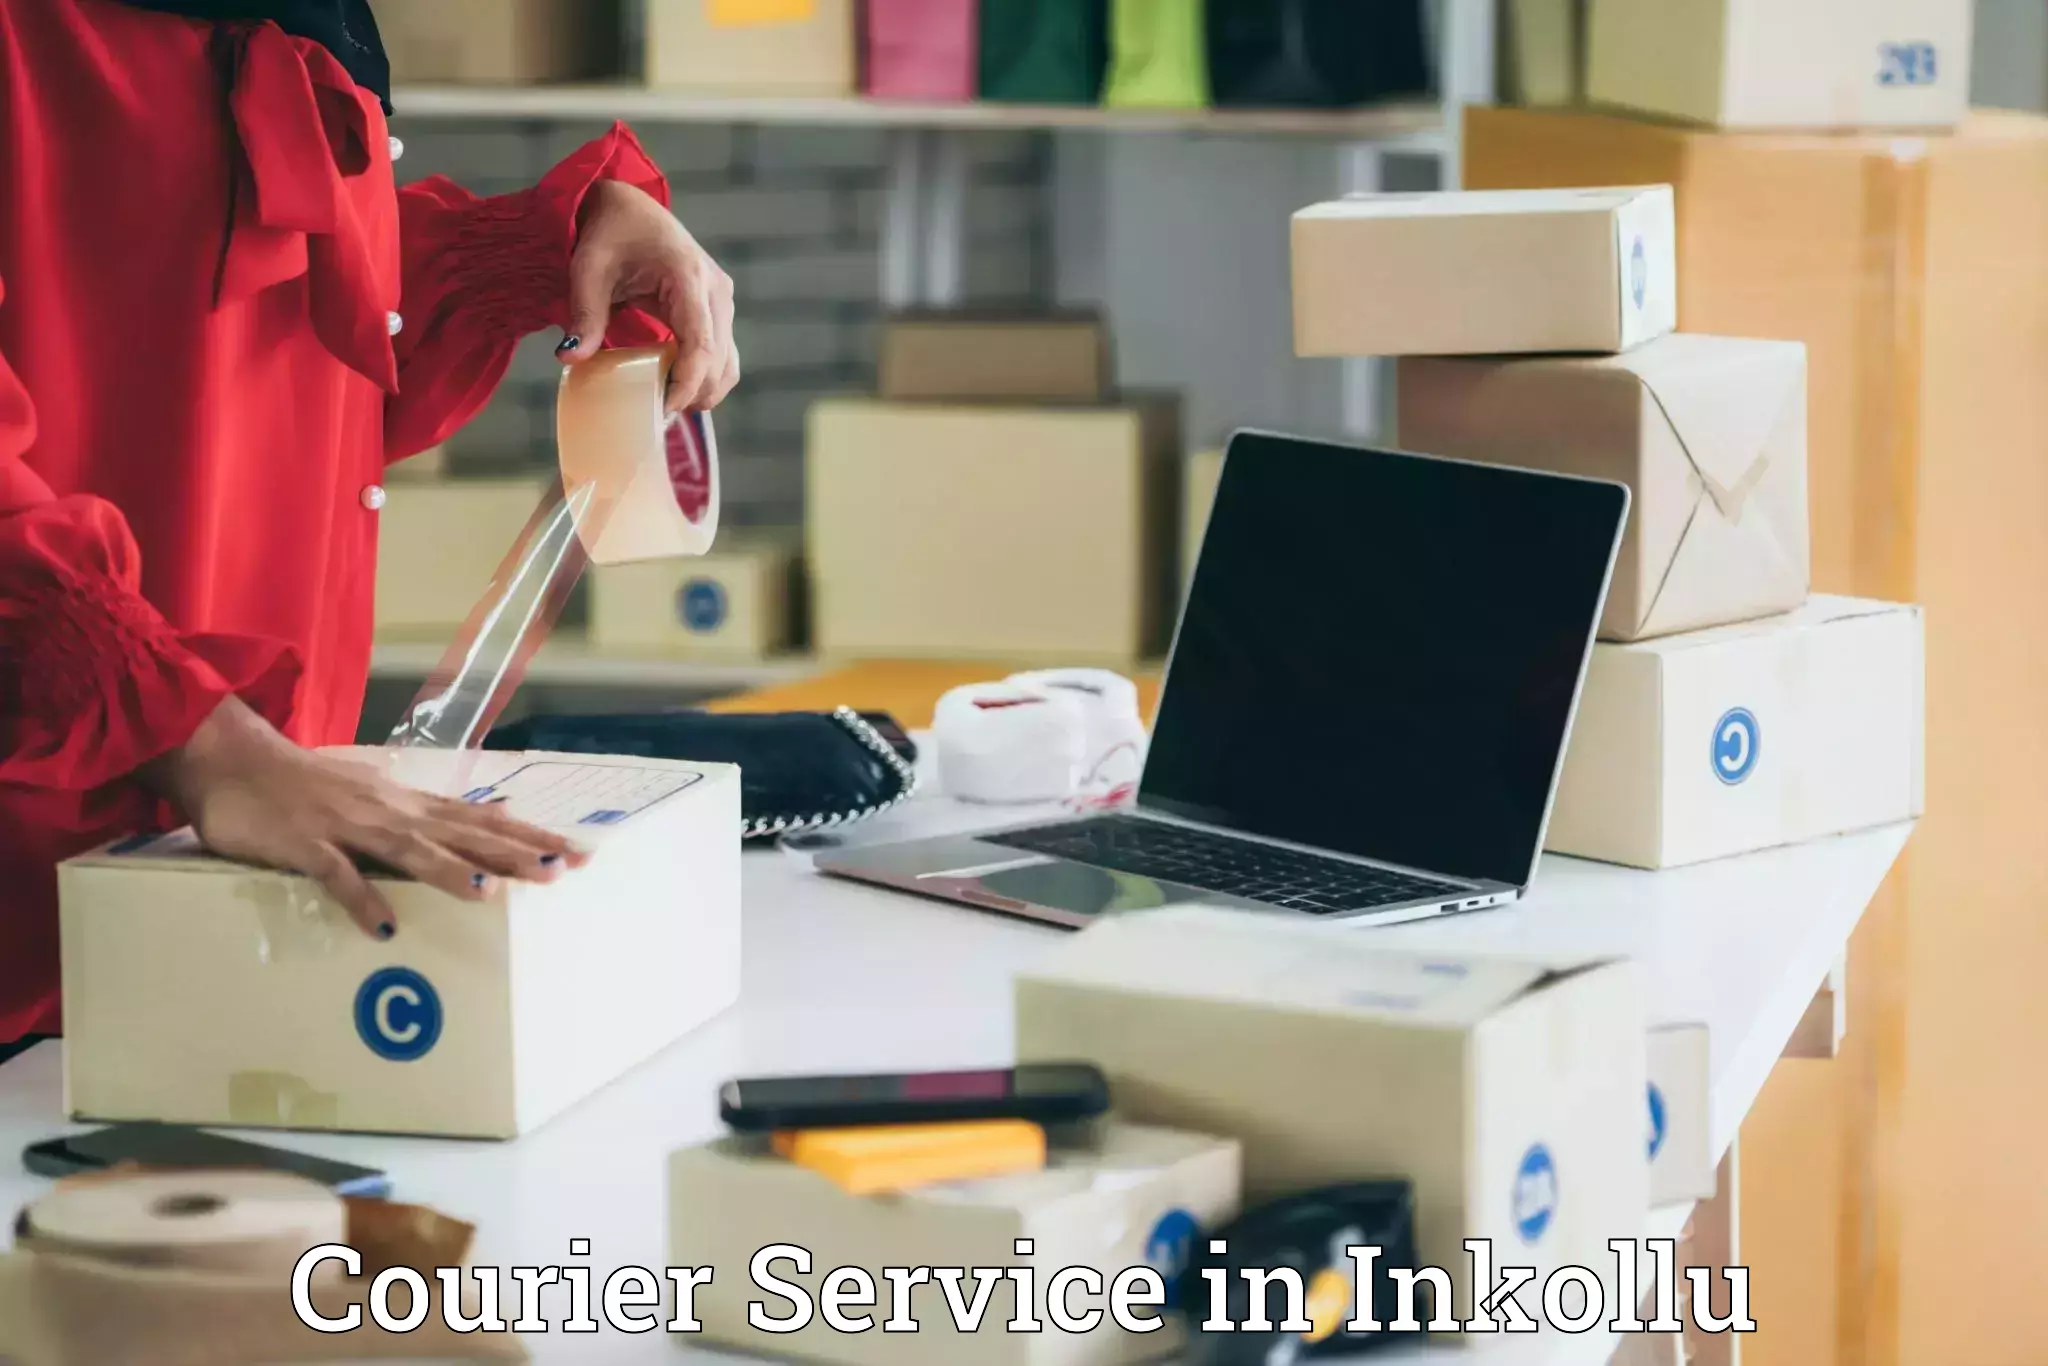 Customer-friendly courier services in Inkollu